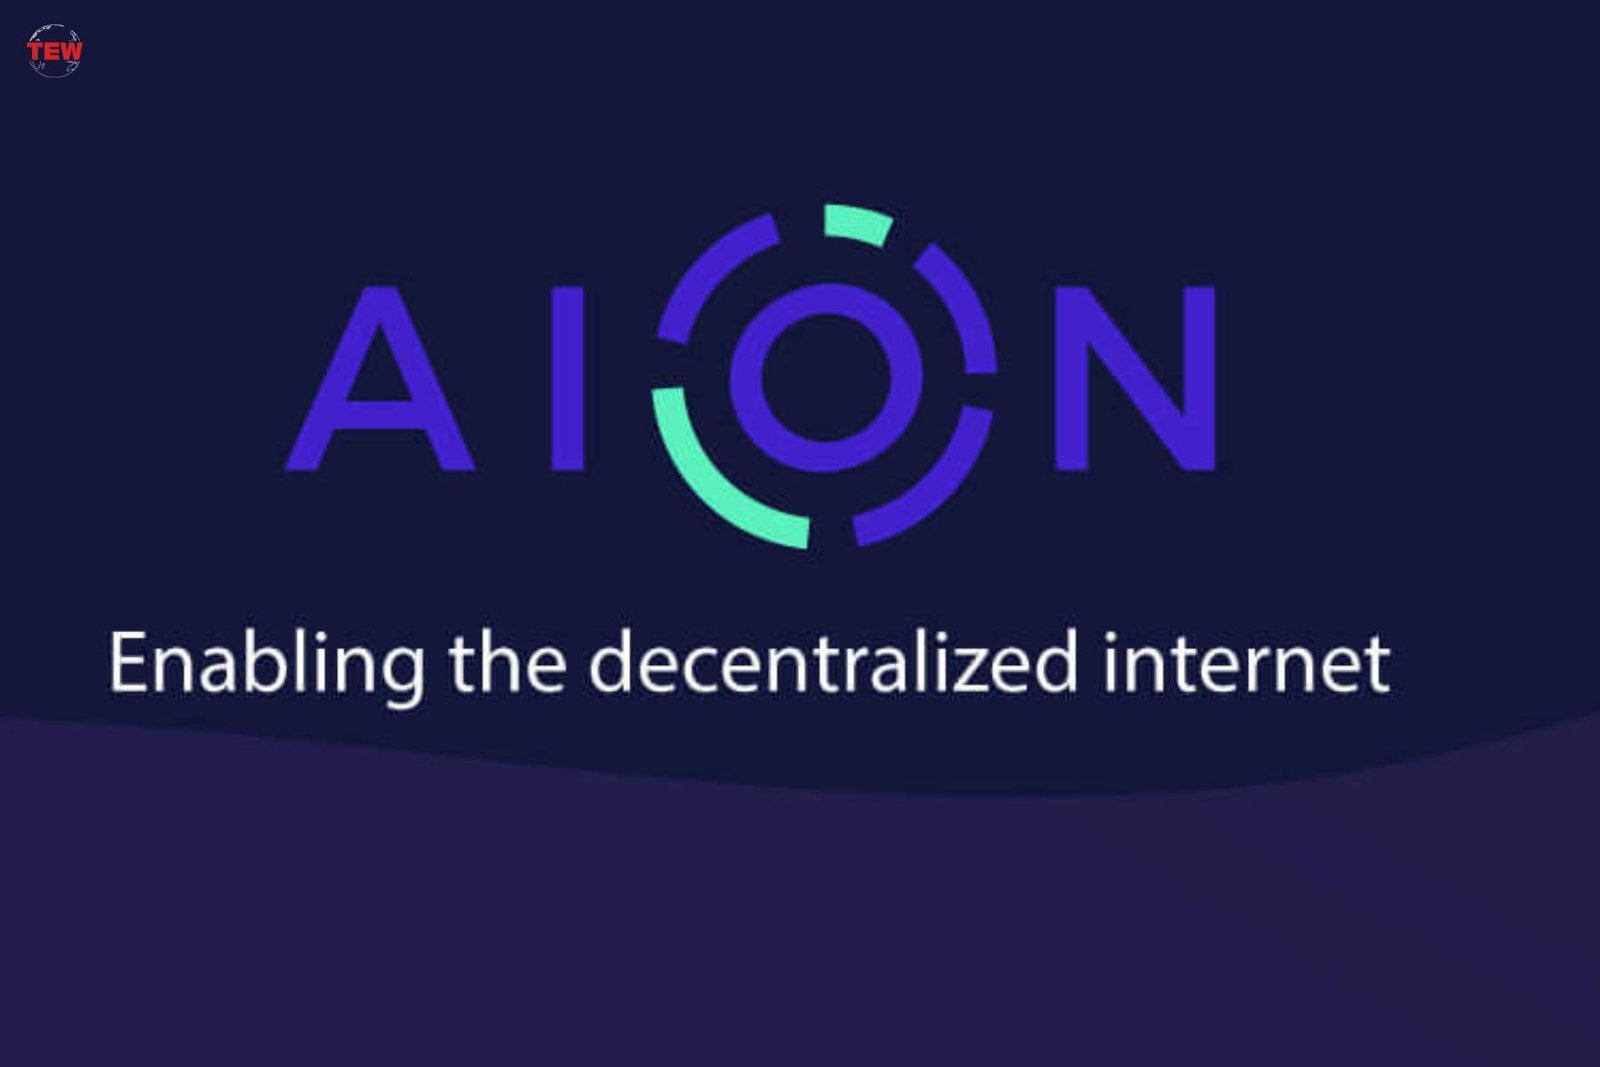 Aion in the Cryptocurrency Landscape ( Source - 101blockchains.com )